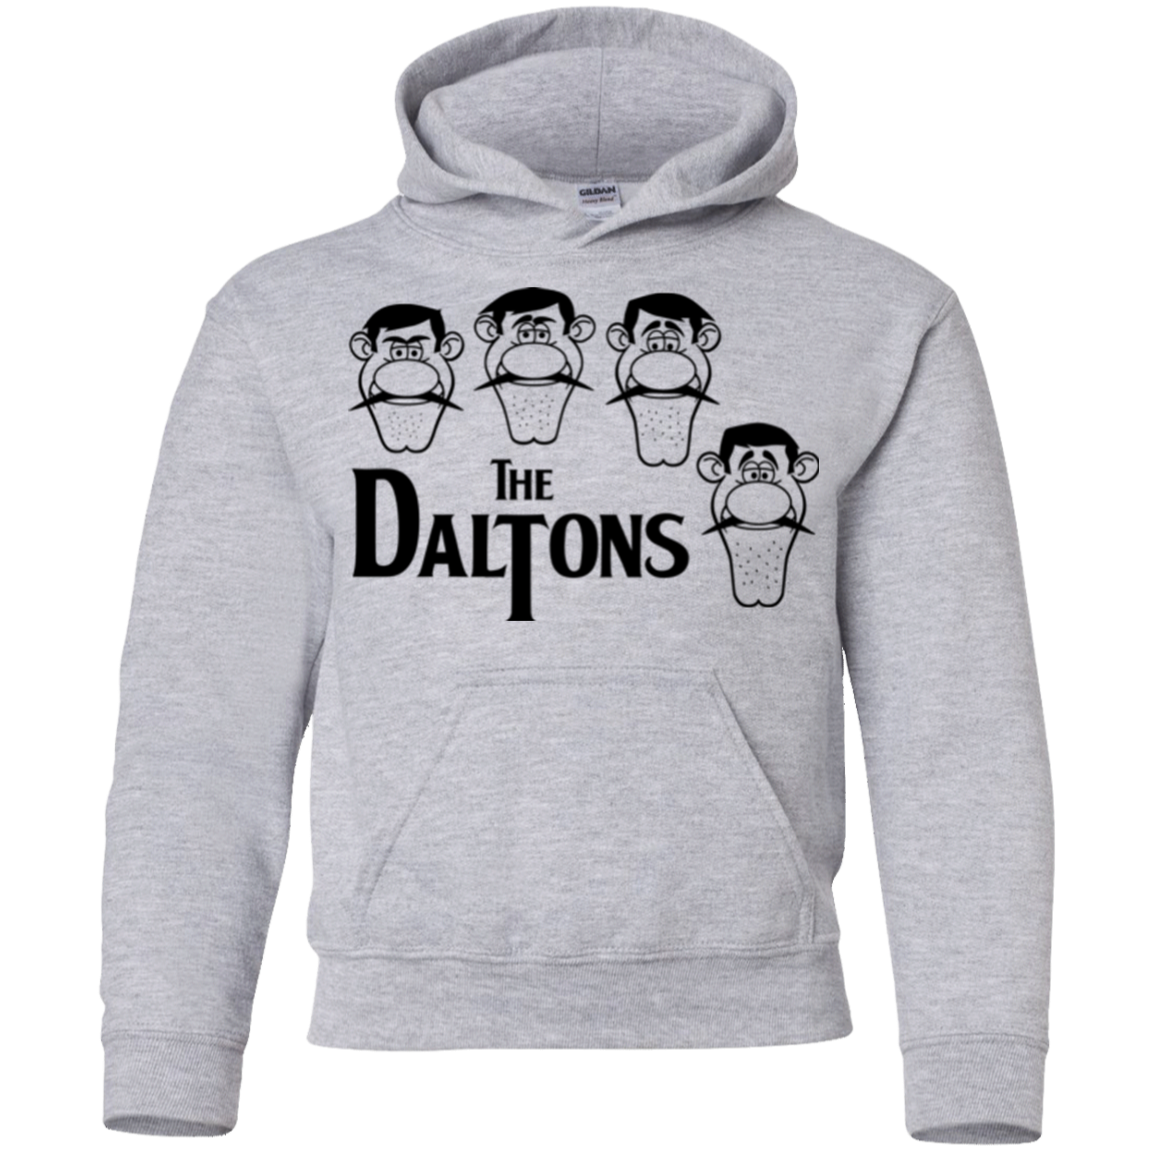 The Daltons Youth Hoodie